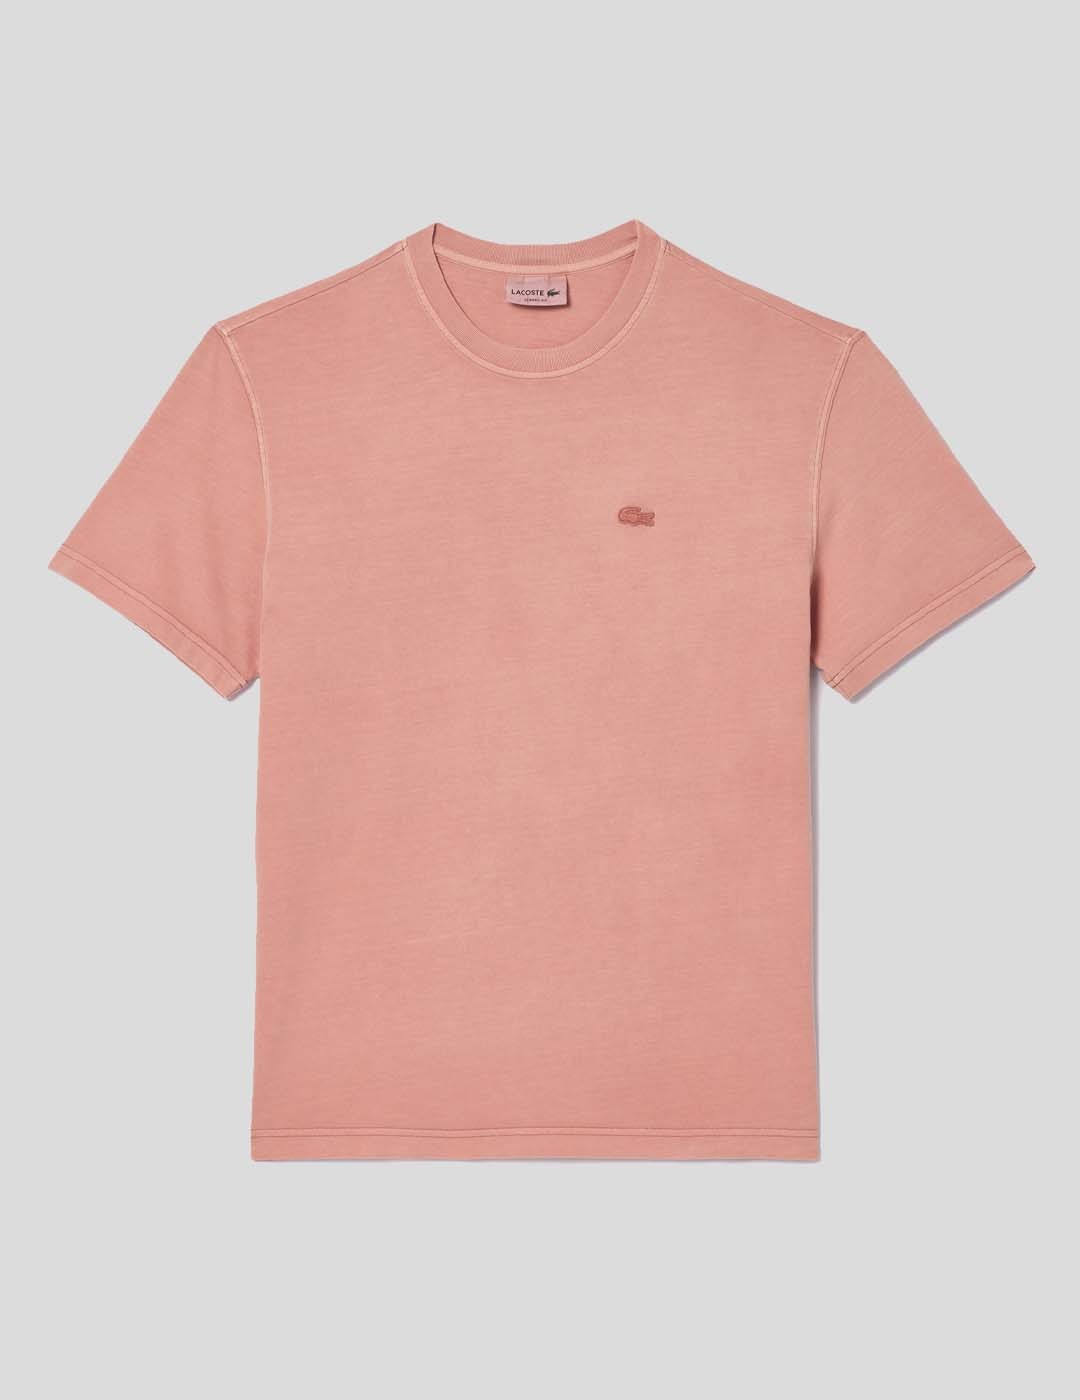 CAMISETA LACOSTE NATURAL DYED TEE   ECO ROSE